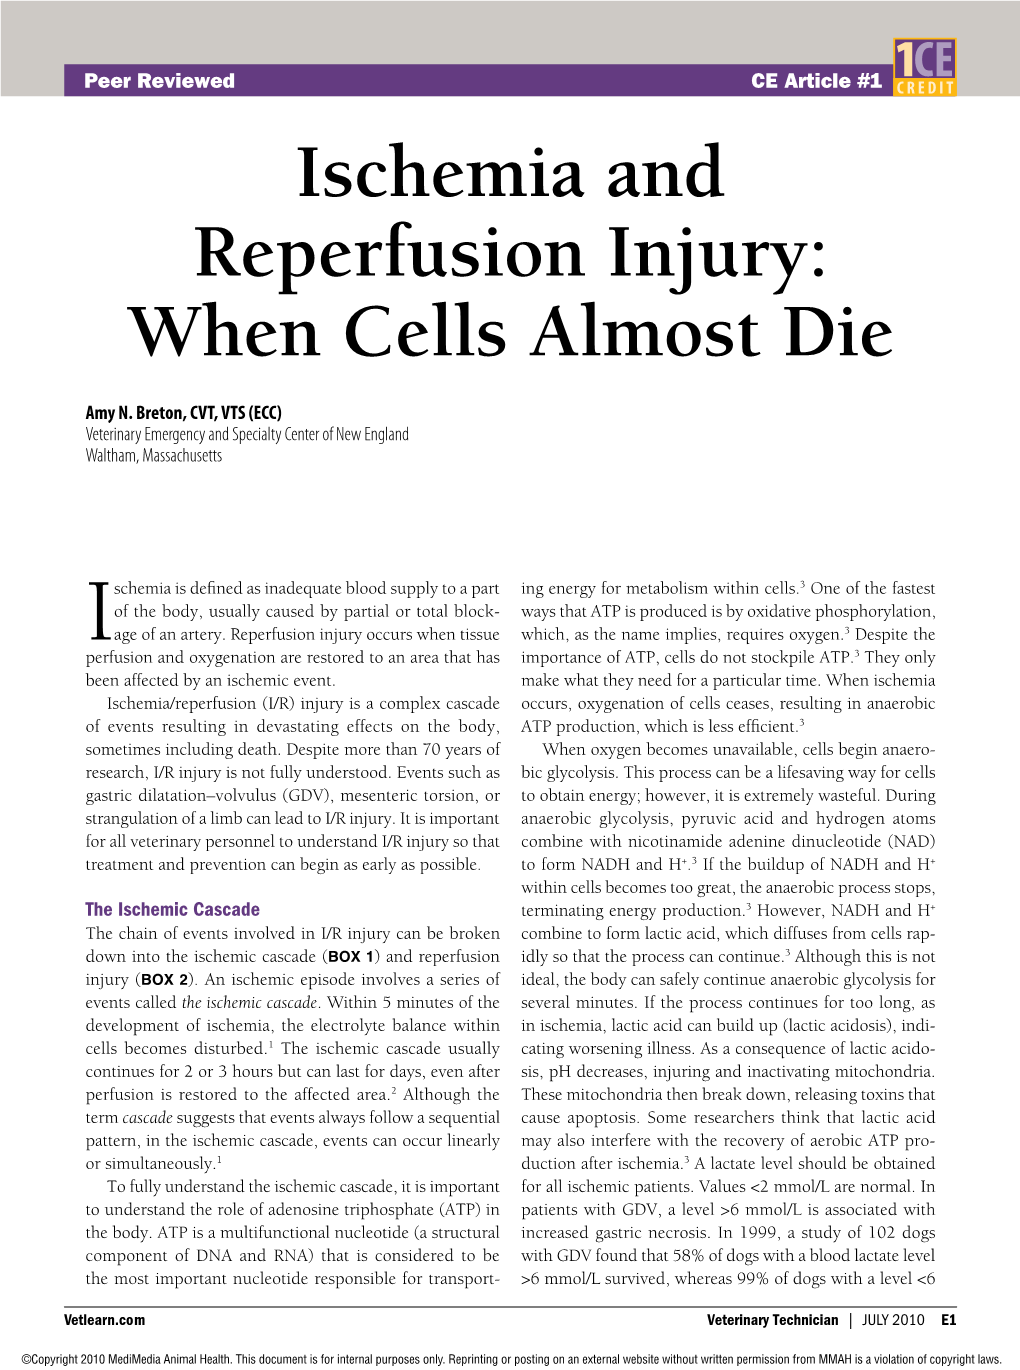 Ischemia and Reperfusion Injury: When Cells Almost Die